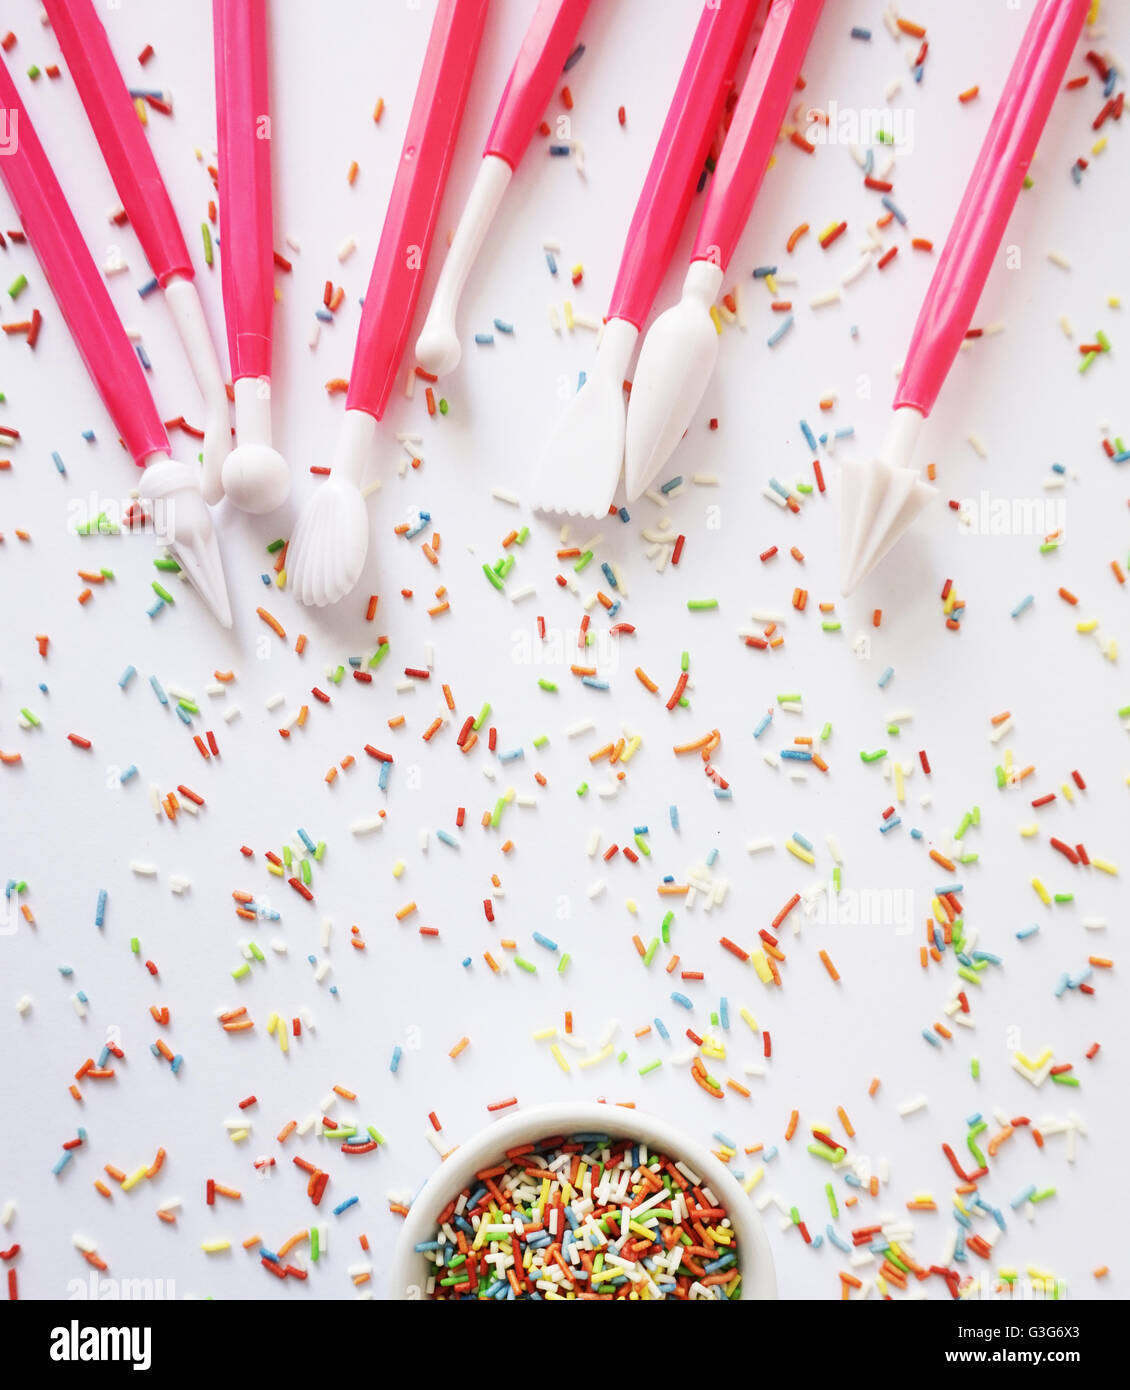 Colorful sprinkles and cake's decoration tools Stock Photo